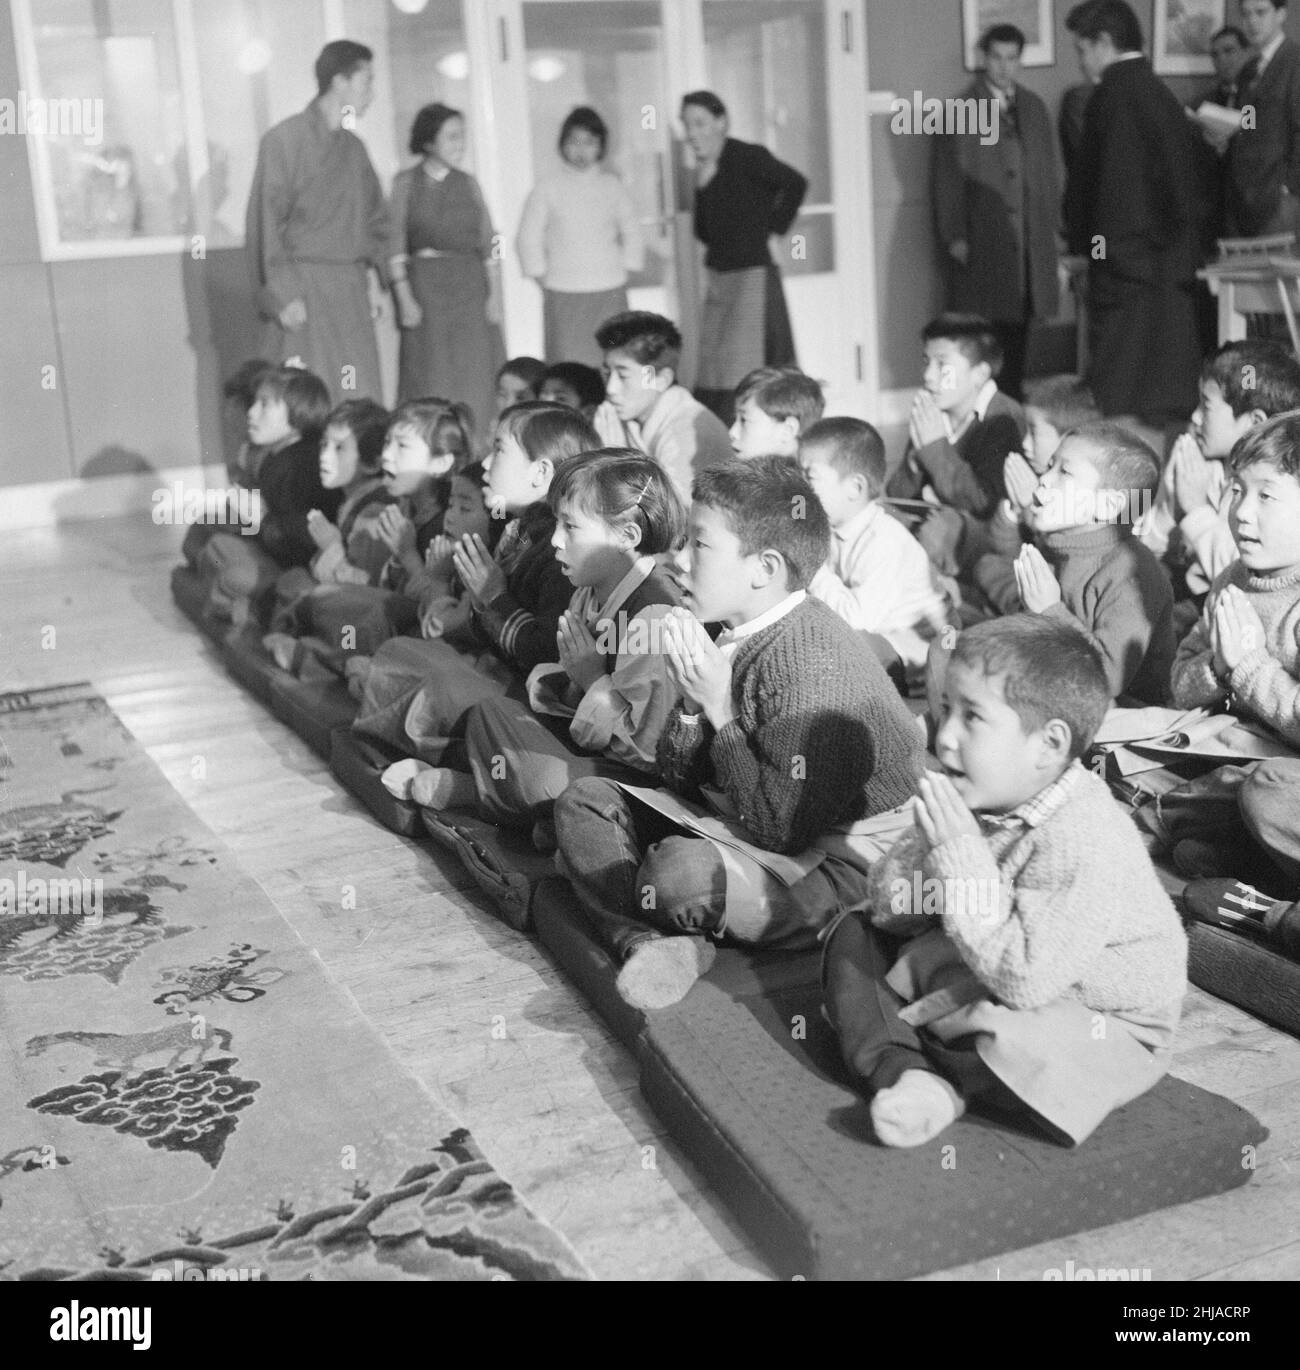 Tibetan Refugee Children at Pestalozzi Village for Children in Sedlescombe, East Sussex, 7th March 1963. Our Picture Shows ... Children participate in Buddhist prayers twice a day.   The thirteen boys and eight girls arrived in the UK, from a refugee camp in northern India. Many now orphaned, the children have fled chinese occupation and persecution.   The community is named after eighteenth century Swiss educationalist, Johann Heinrich Pestalozzi, who devoted his life to closing divisions in society through education of the whole person, their Head, Heart and Hands. Stock Photo